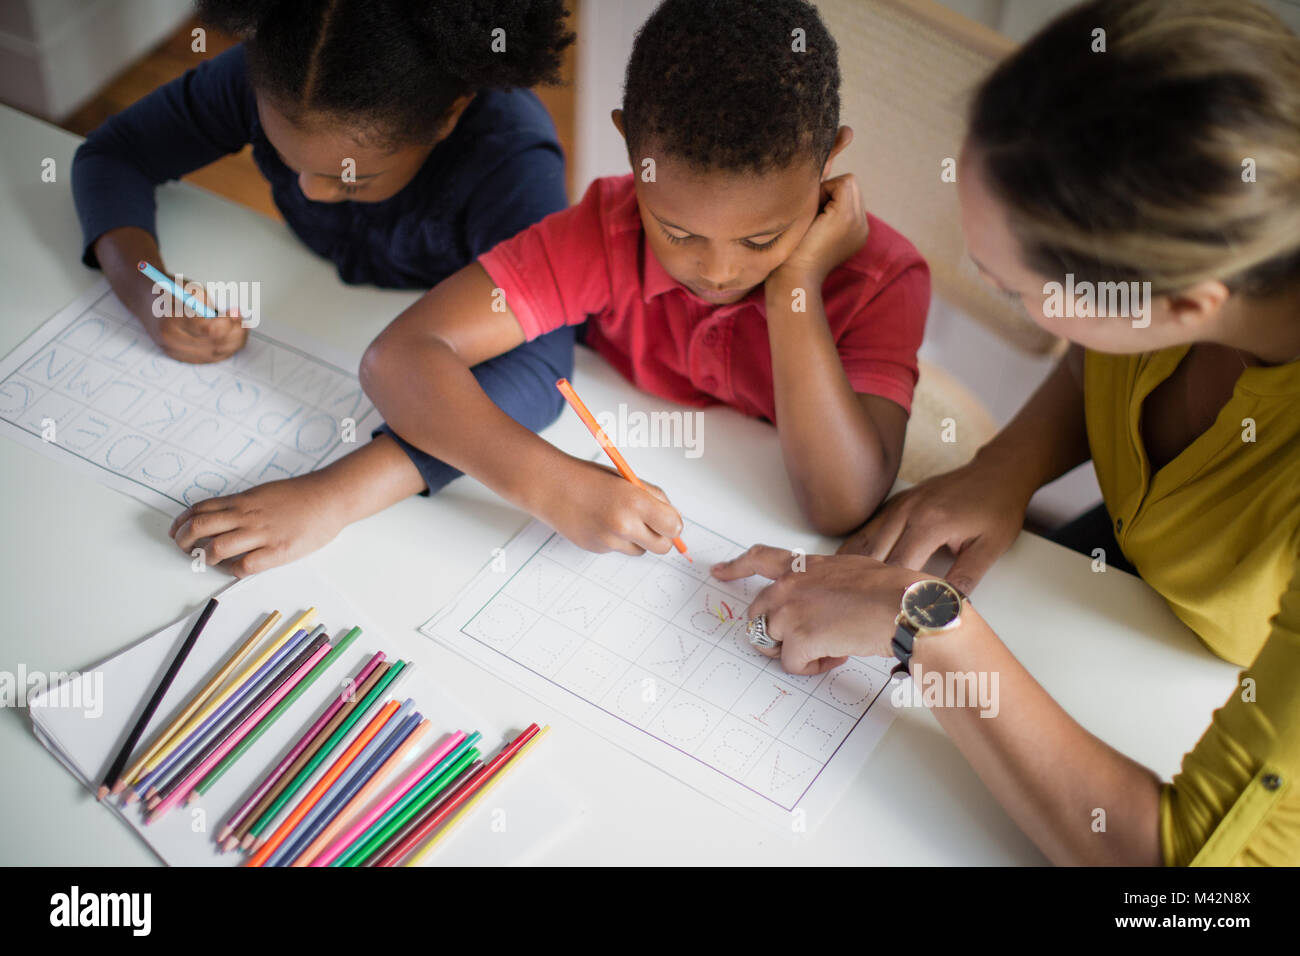 Children learning how to write alphabet Stock Photo